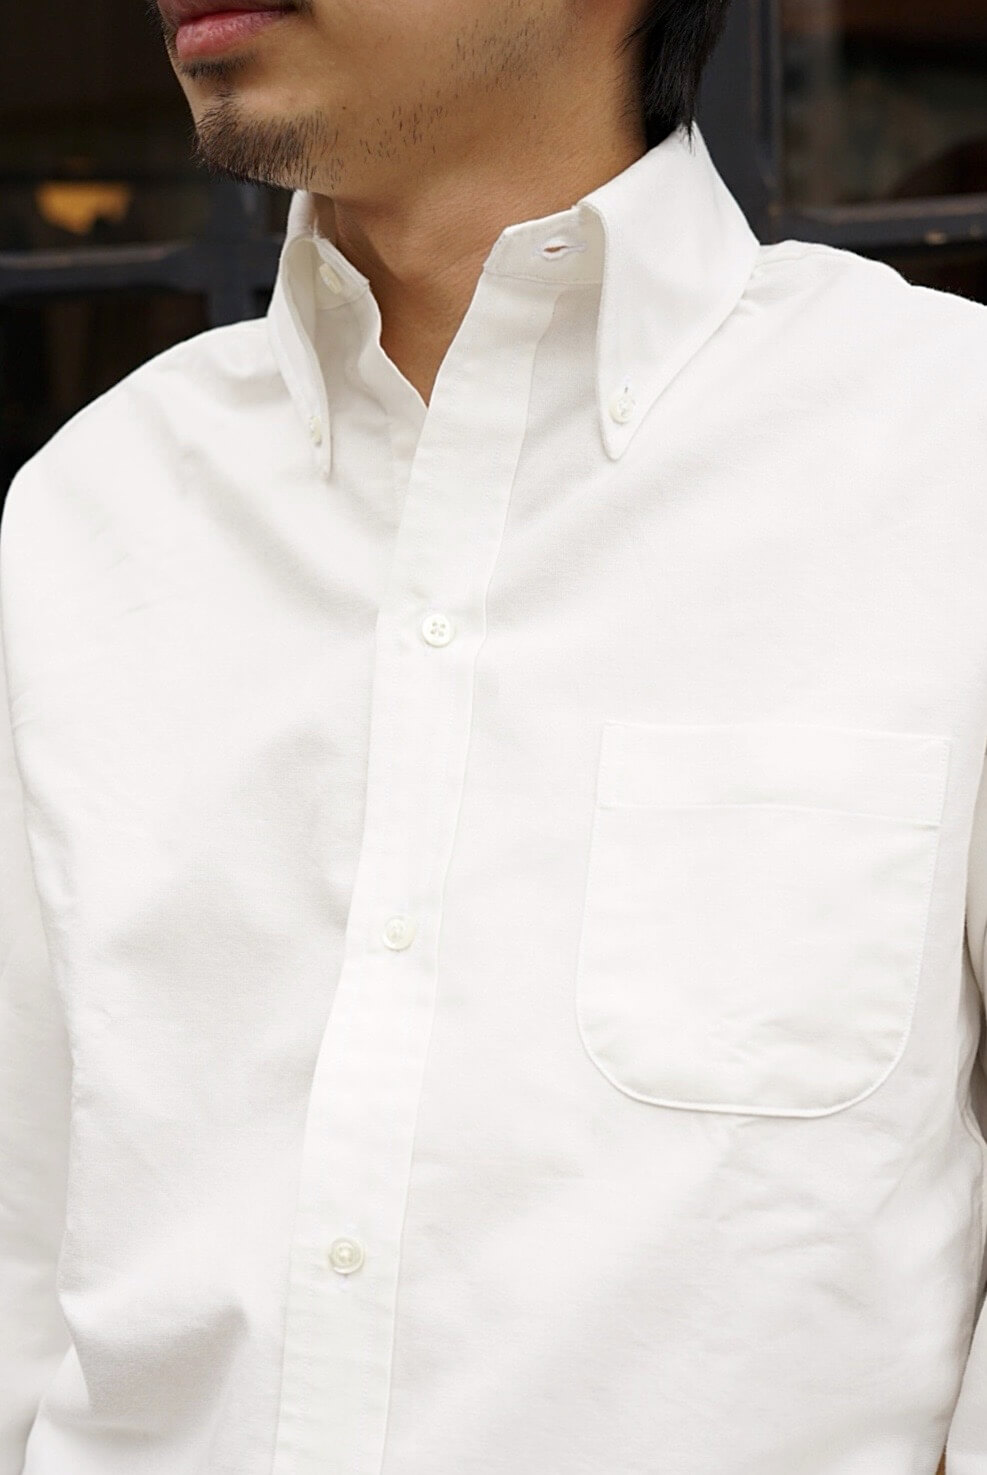 INDIVIDUALIZED SHIRTS Front 6 Buttons B.D. SHIRTS | ARCH 市電通り